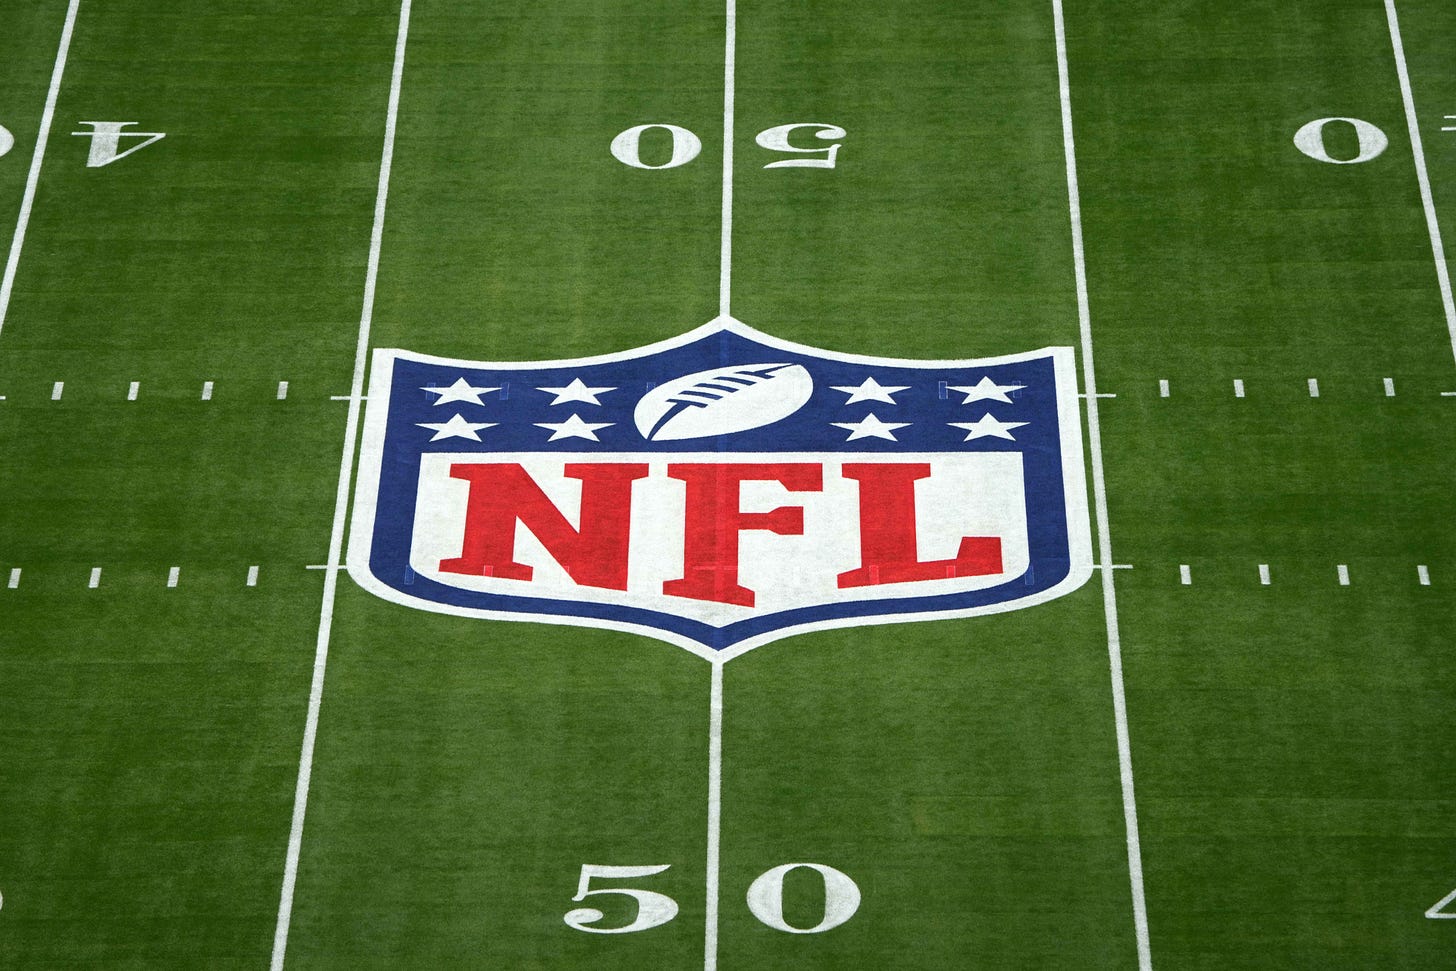 NFL Nearing $25B Revenue Goal And Isn't Slowing Down